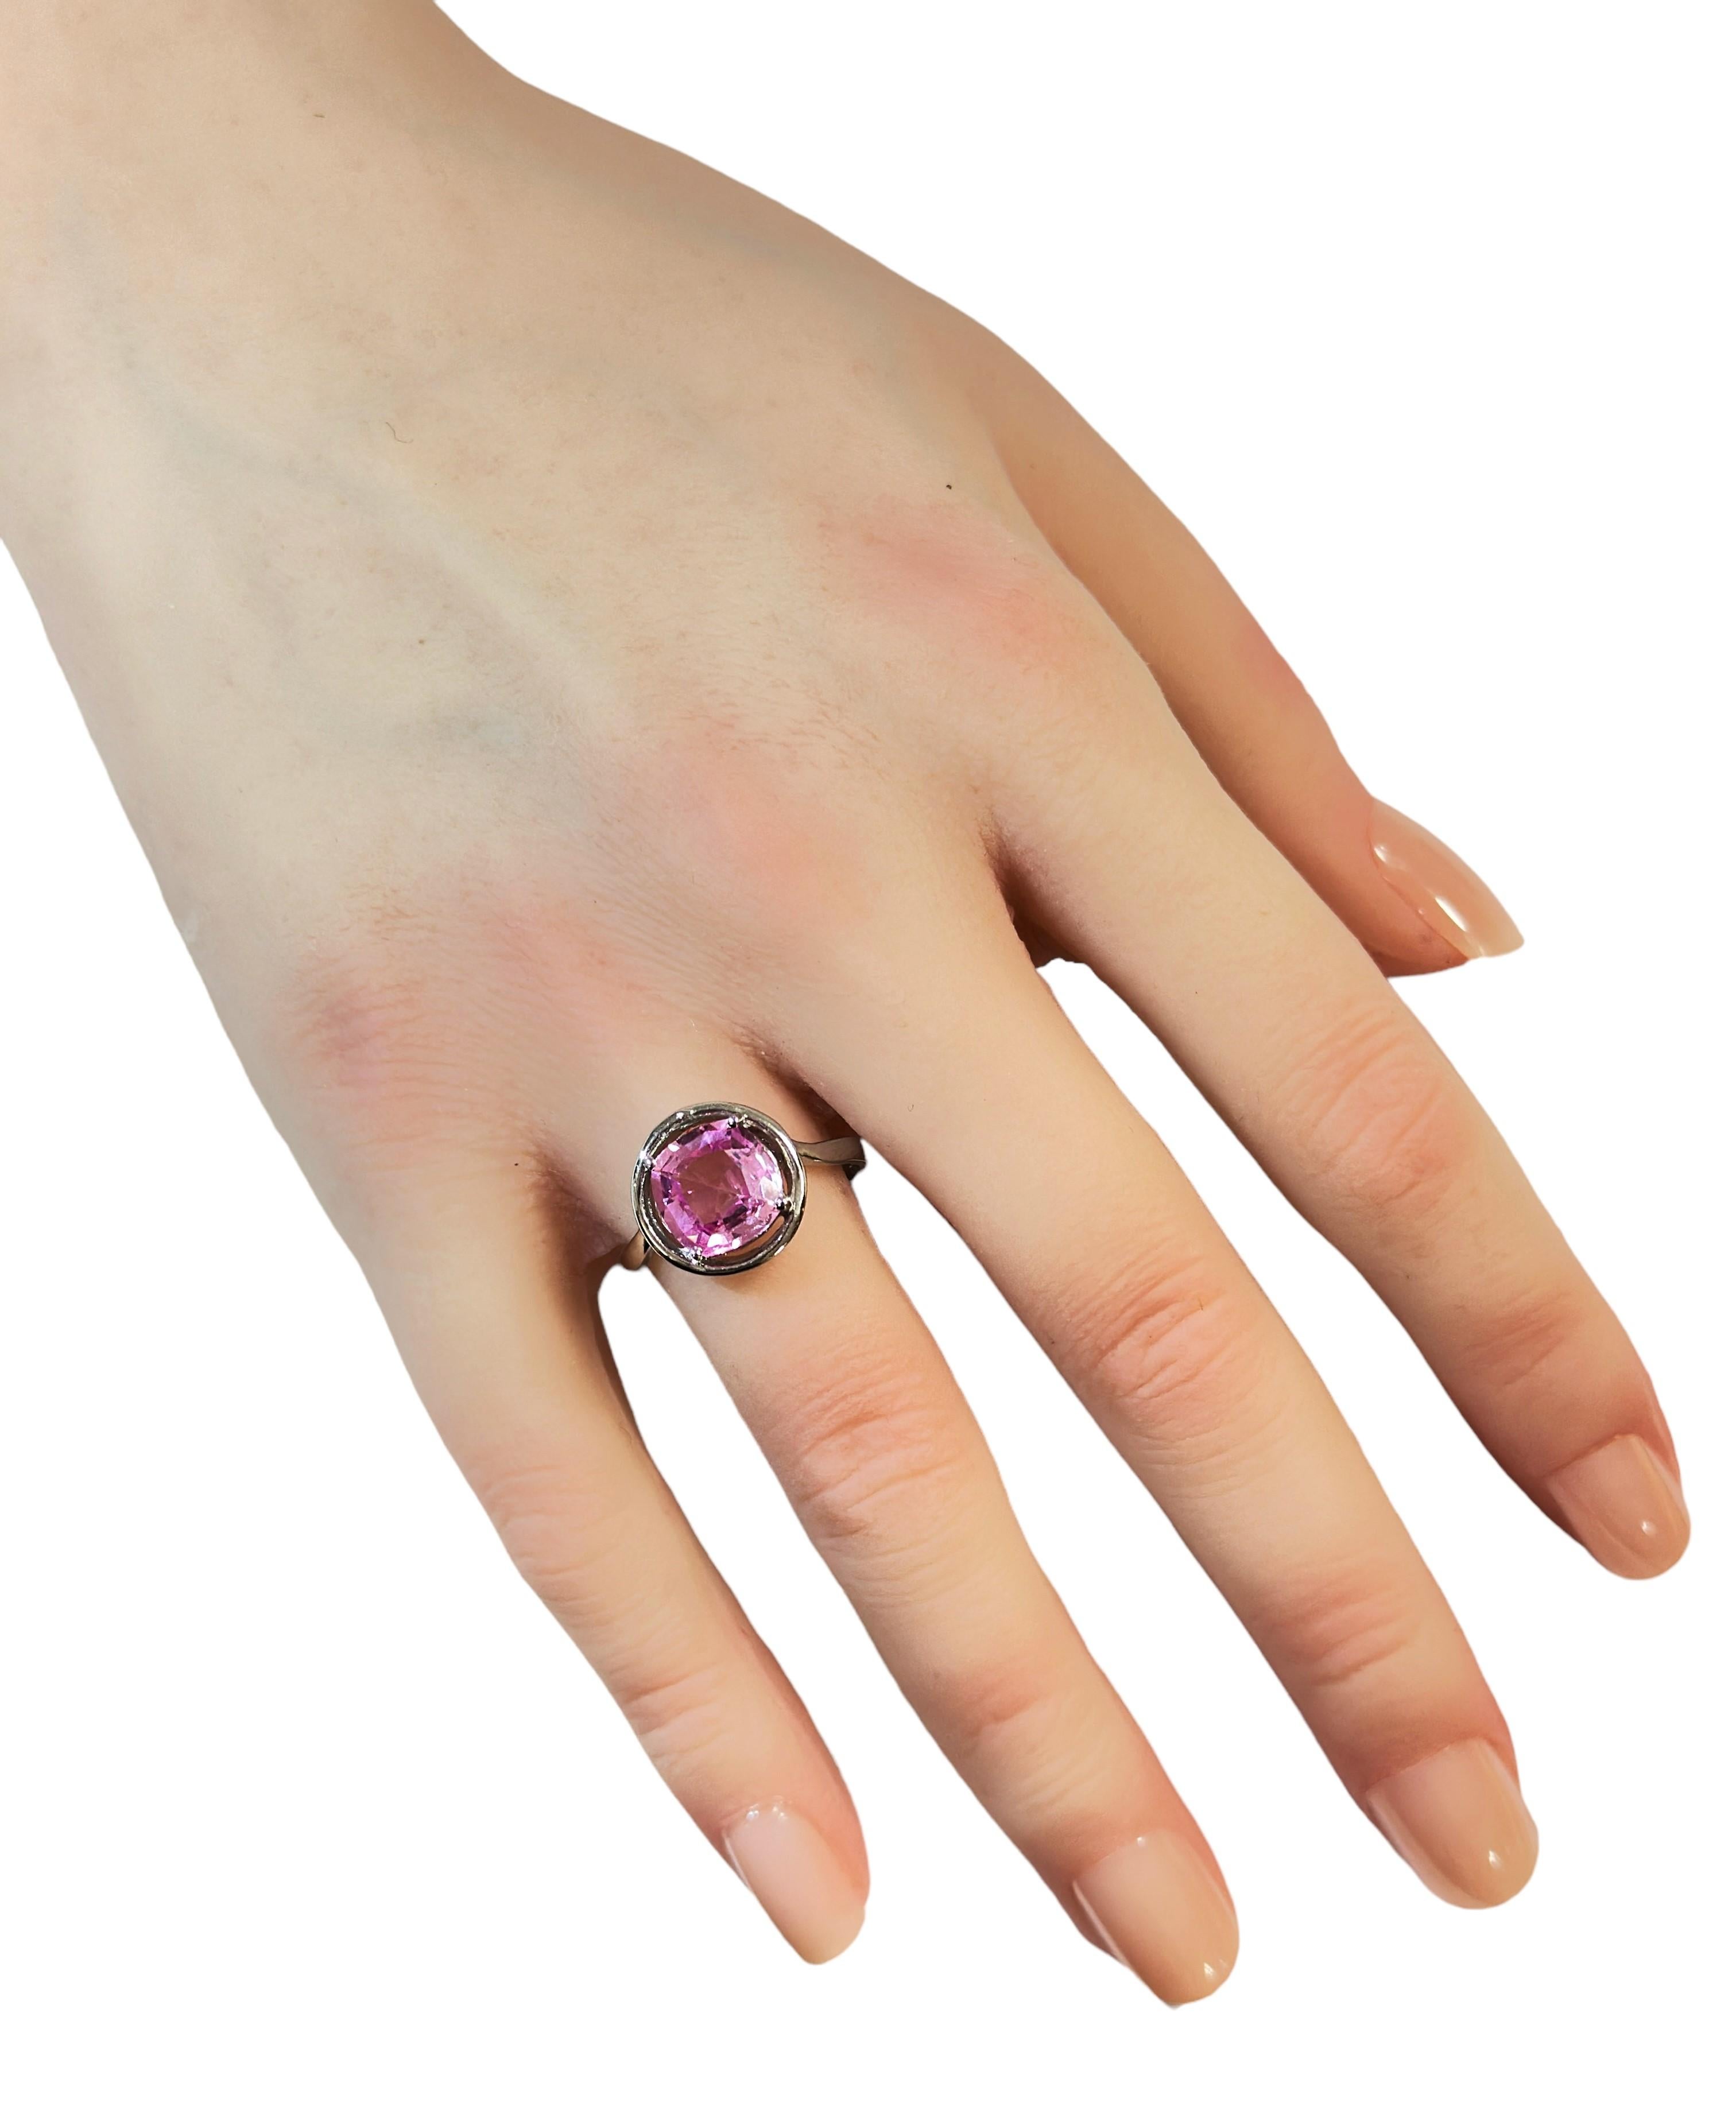 Such a beautiful color this ring has.  The ring is a size 7.75.  The stone is from Africa and is just exquisite.  It is a cushion cut stone and is 3.3.0 Ct   The main stone measures 8.8 mm. It is a simple and elegant design.  A ring that you can